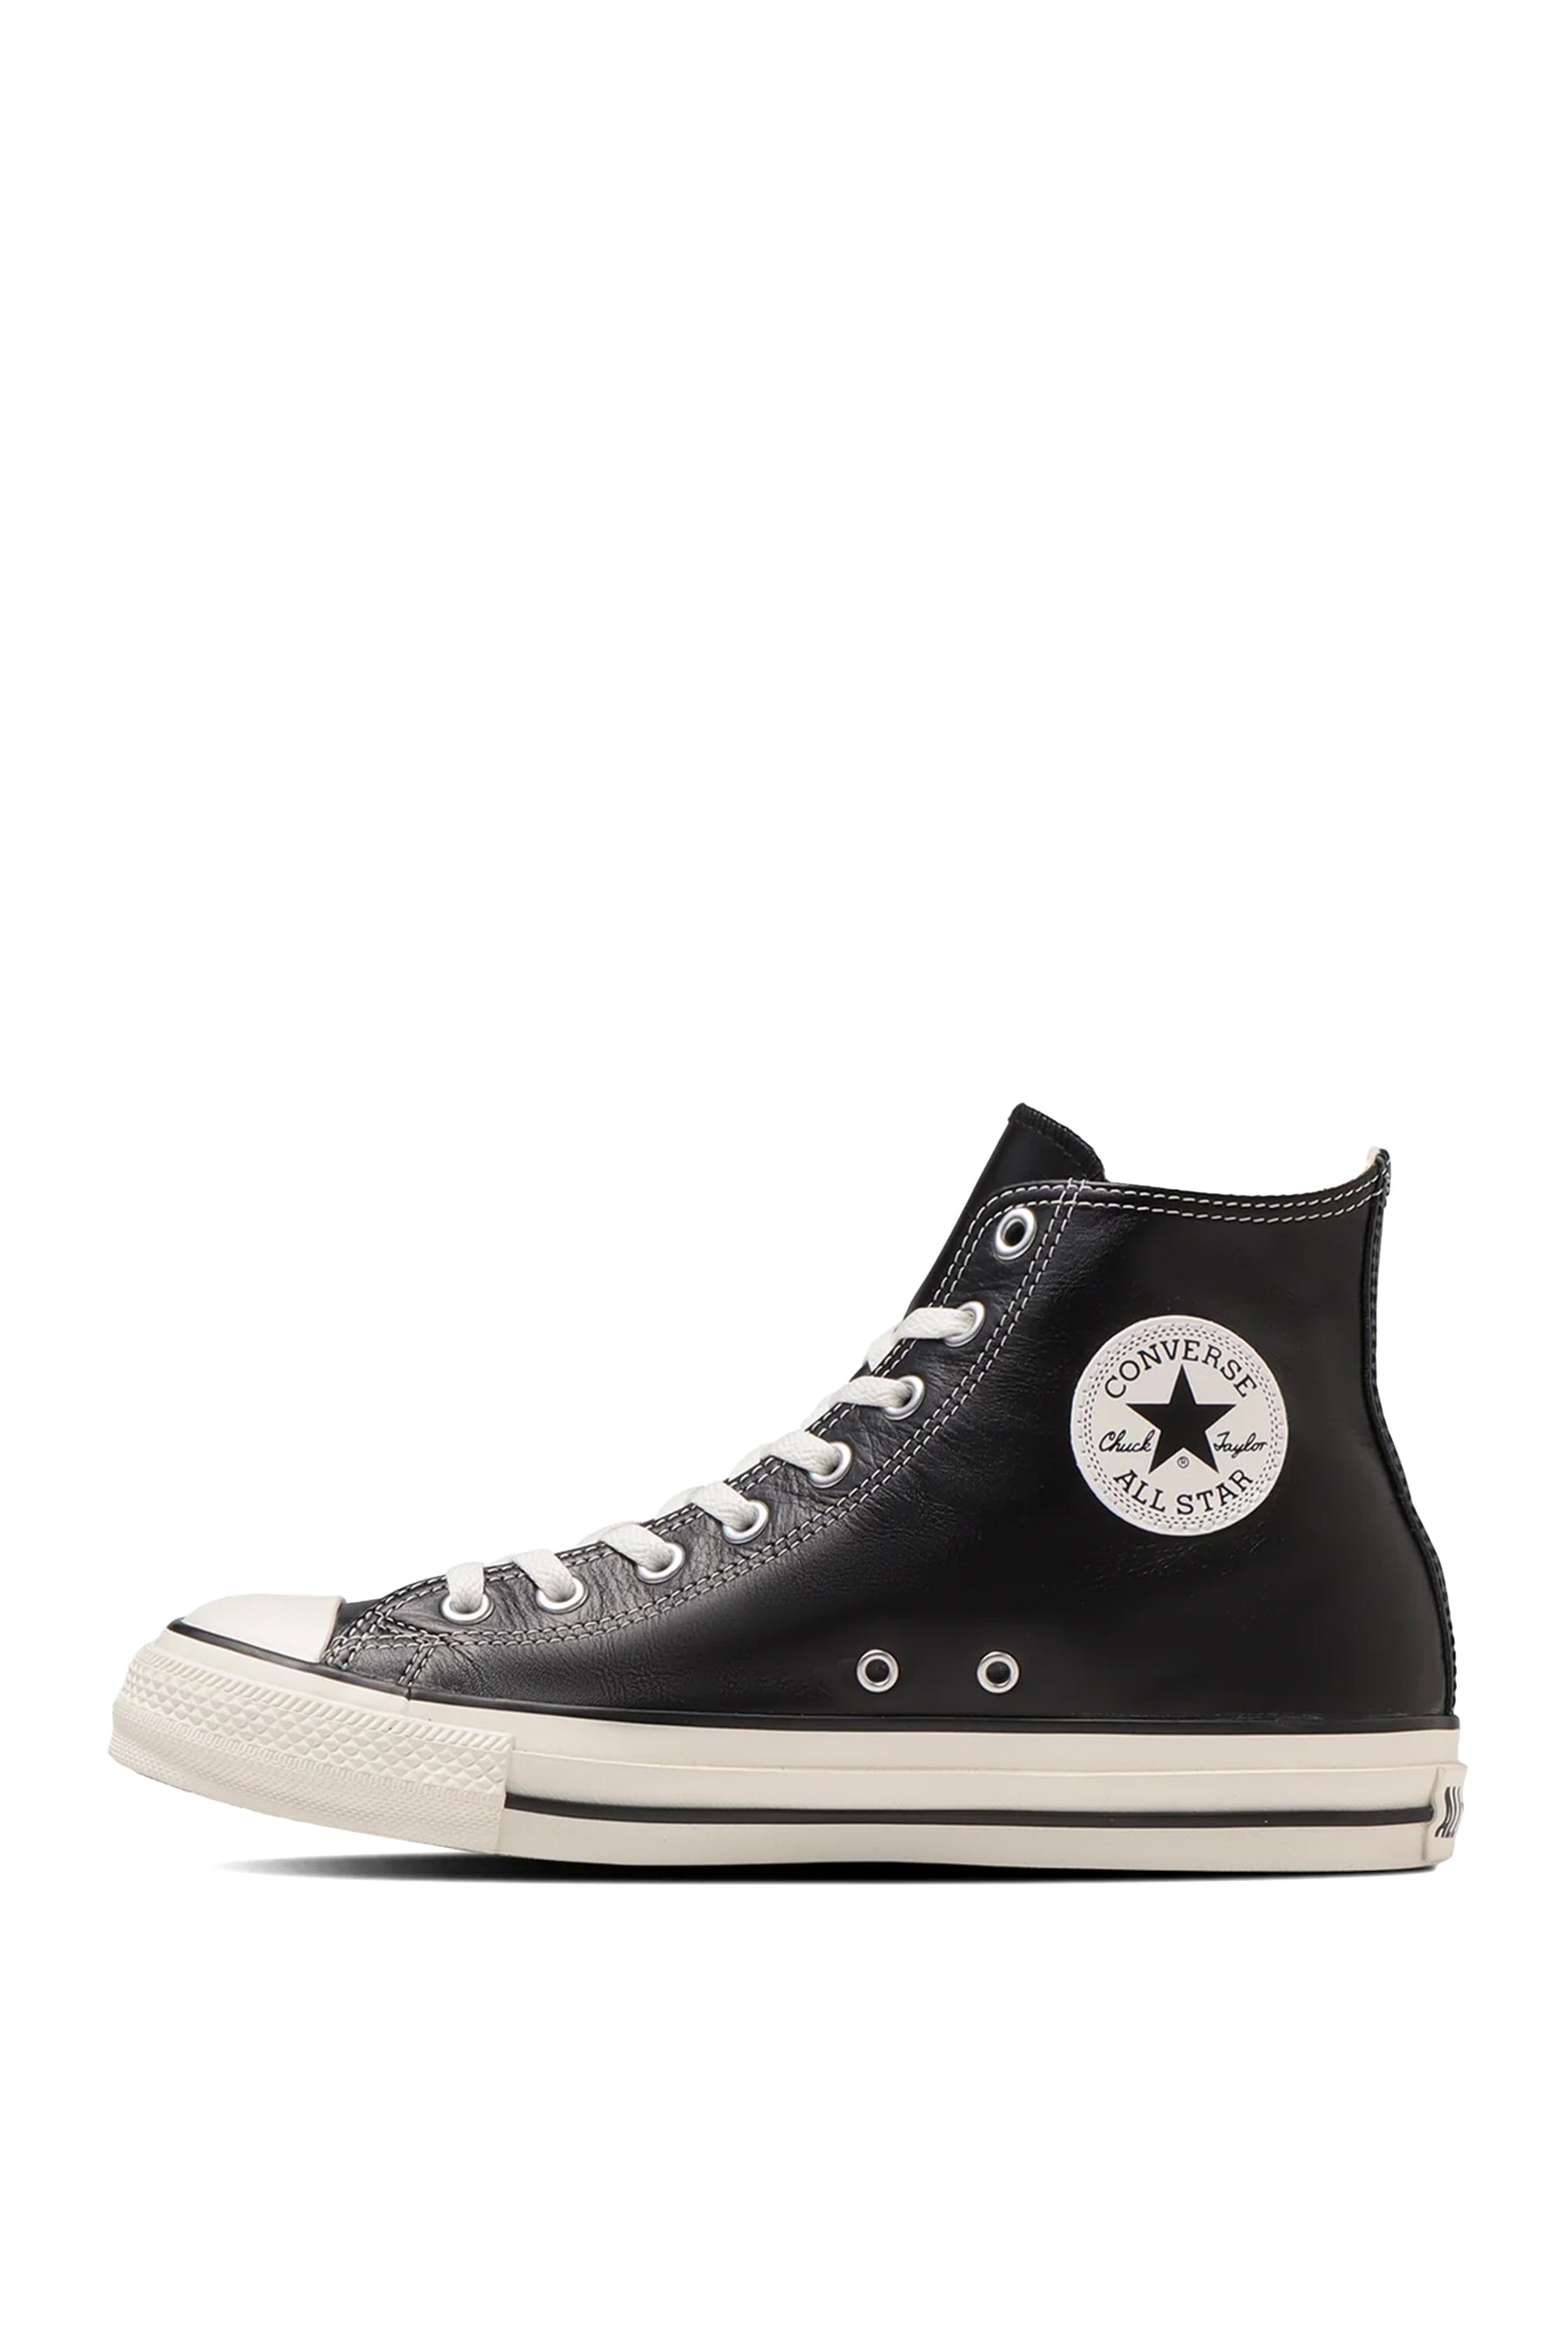 CONVERSE ALL STAR OLIVE GREEN LEATHER HI / BLK